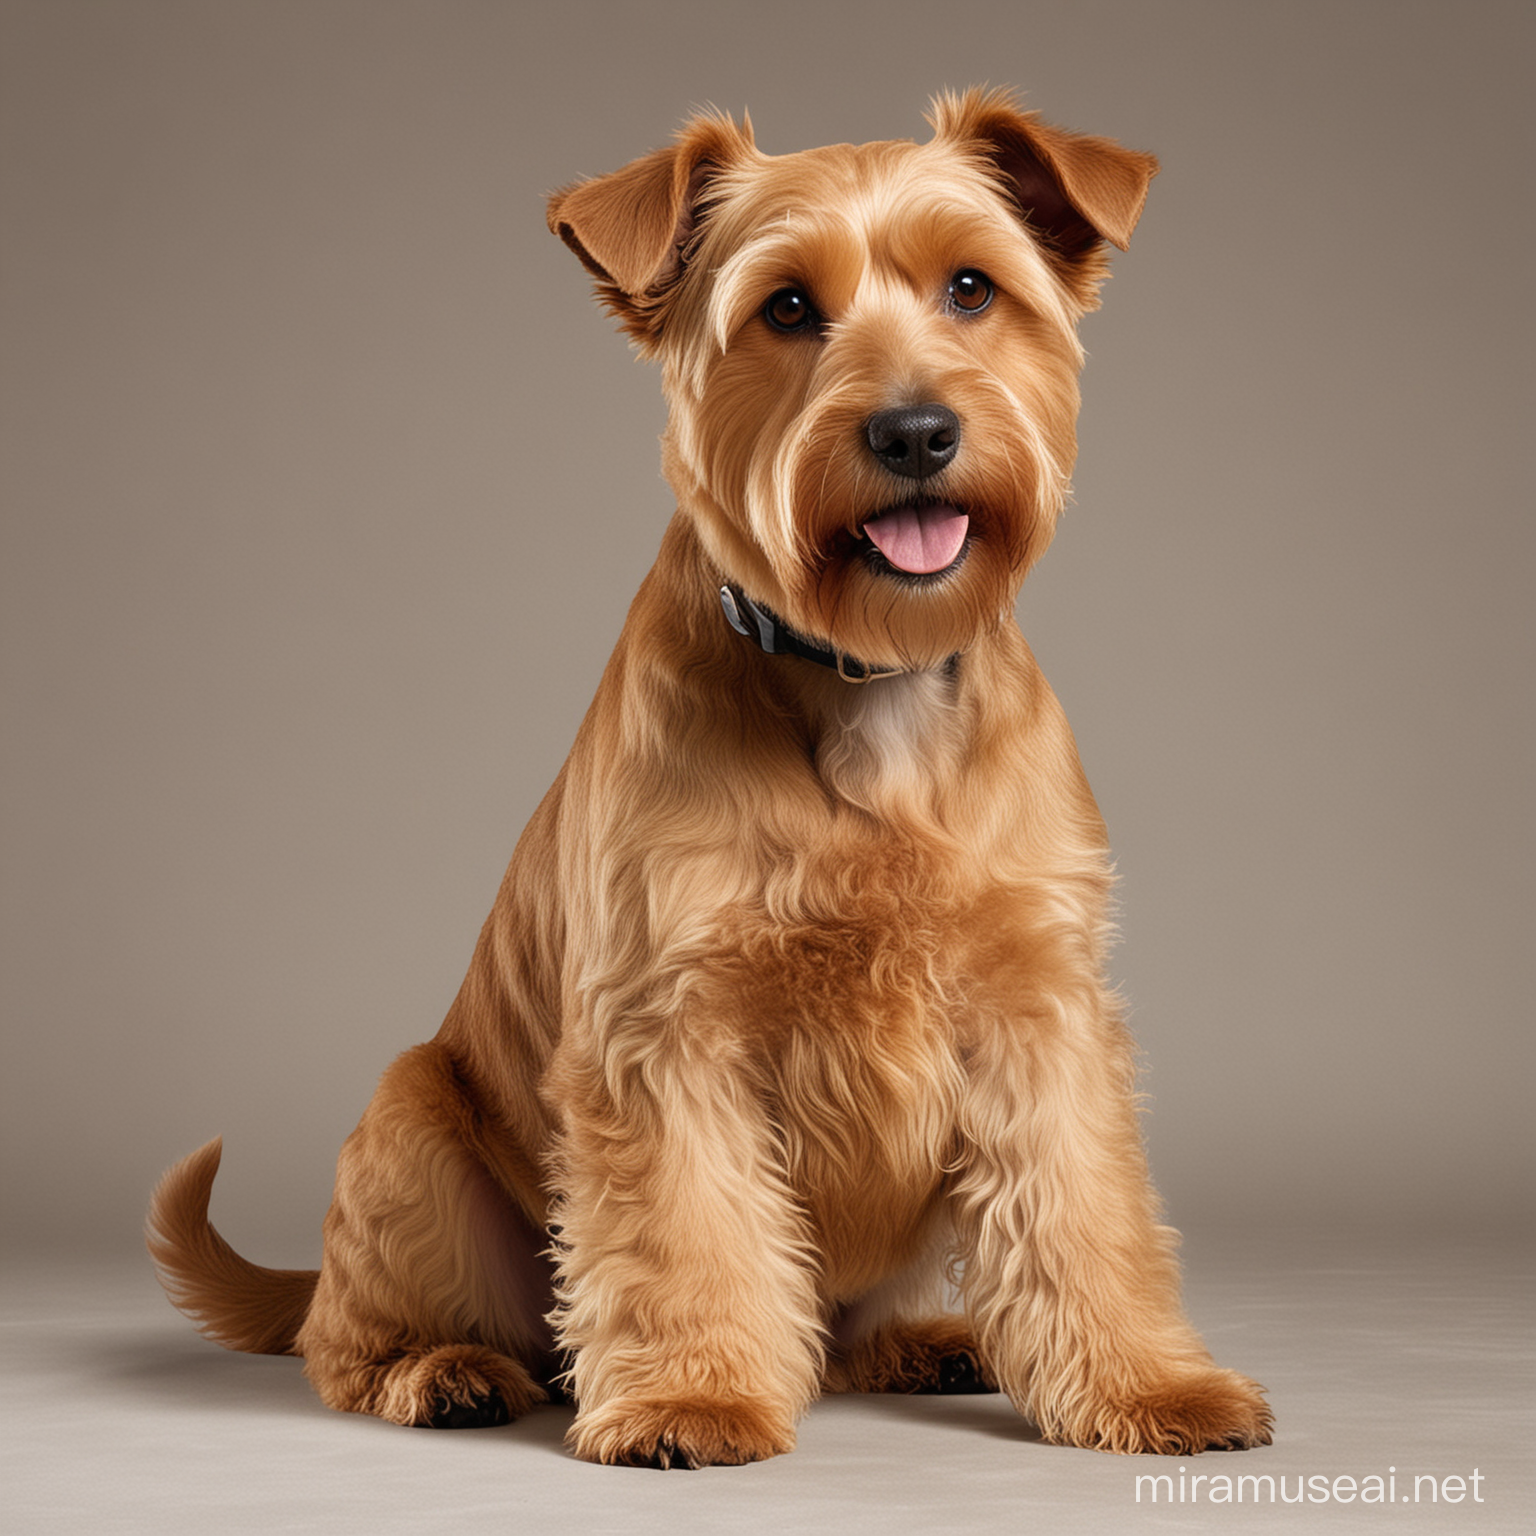 Adorable Shaggy Light Brown Terrier Dog Sitting